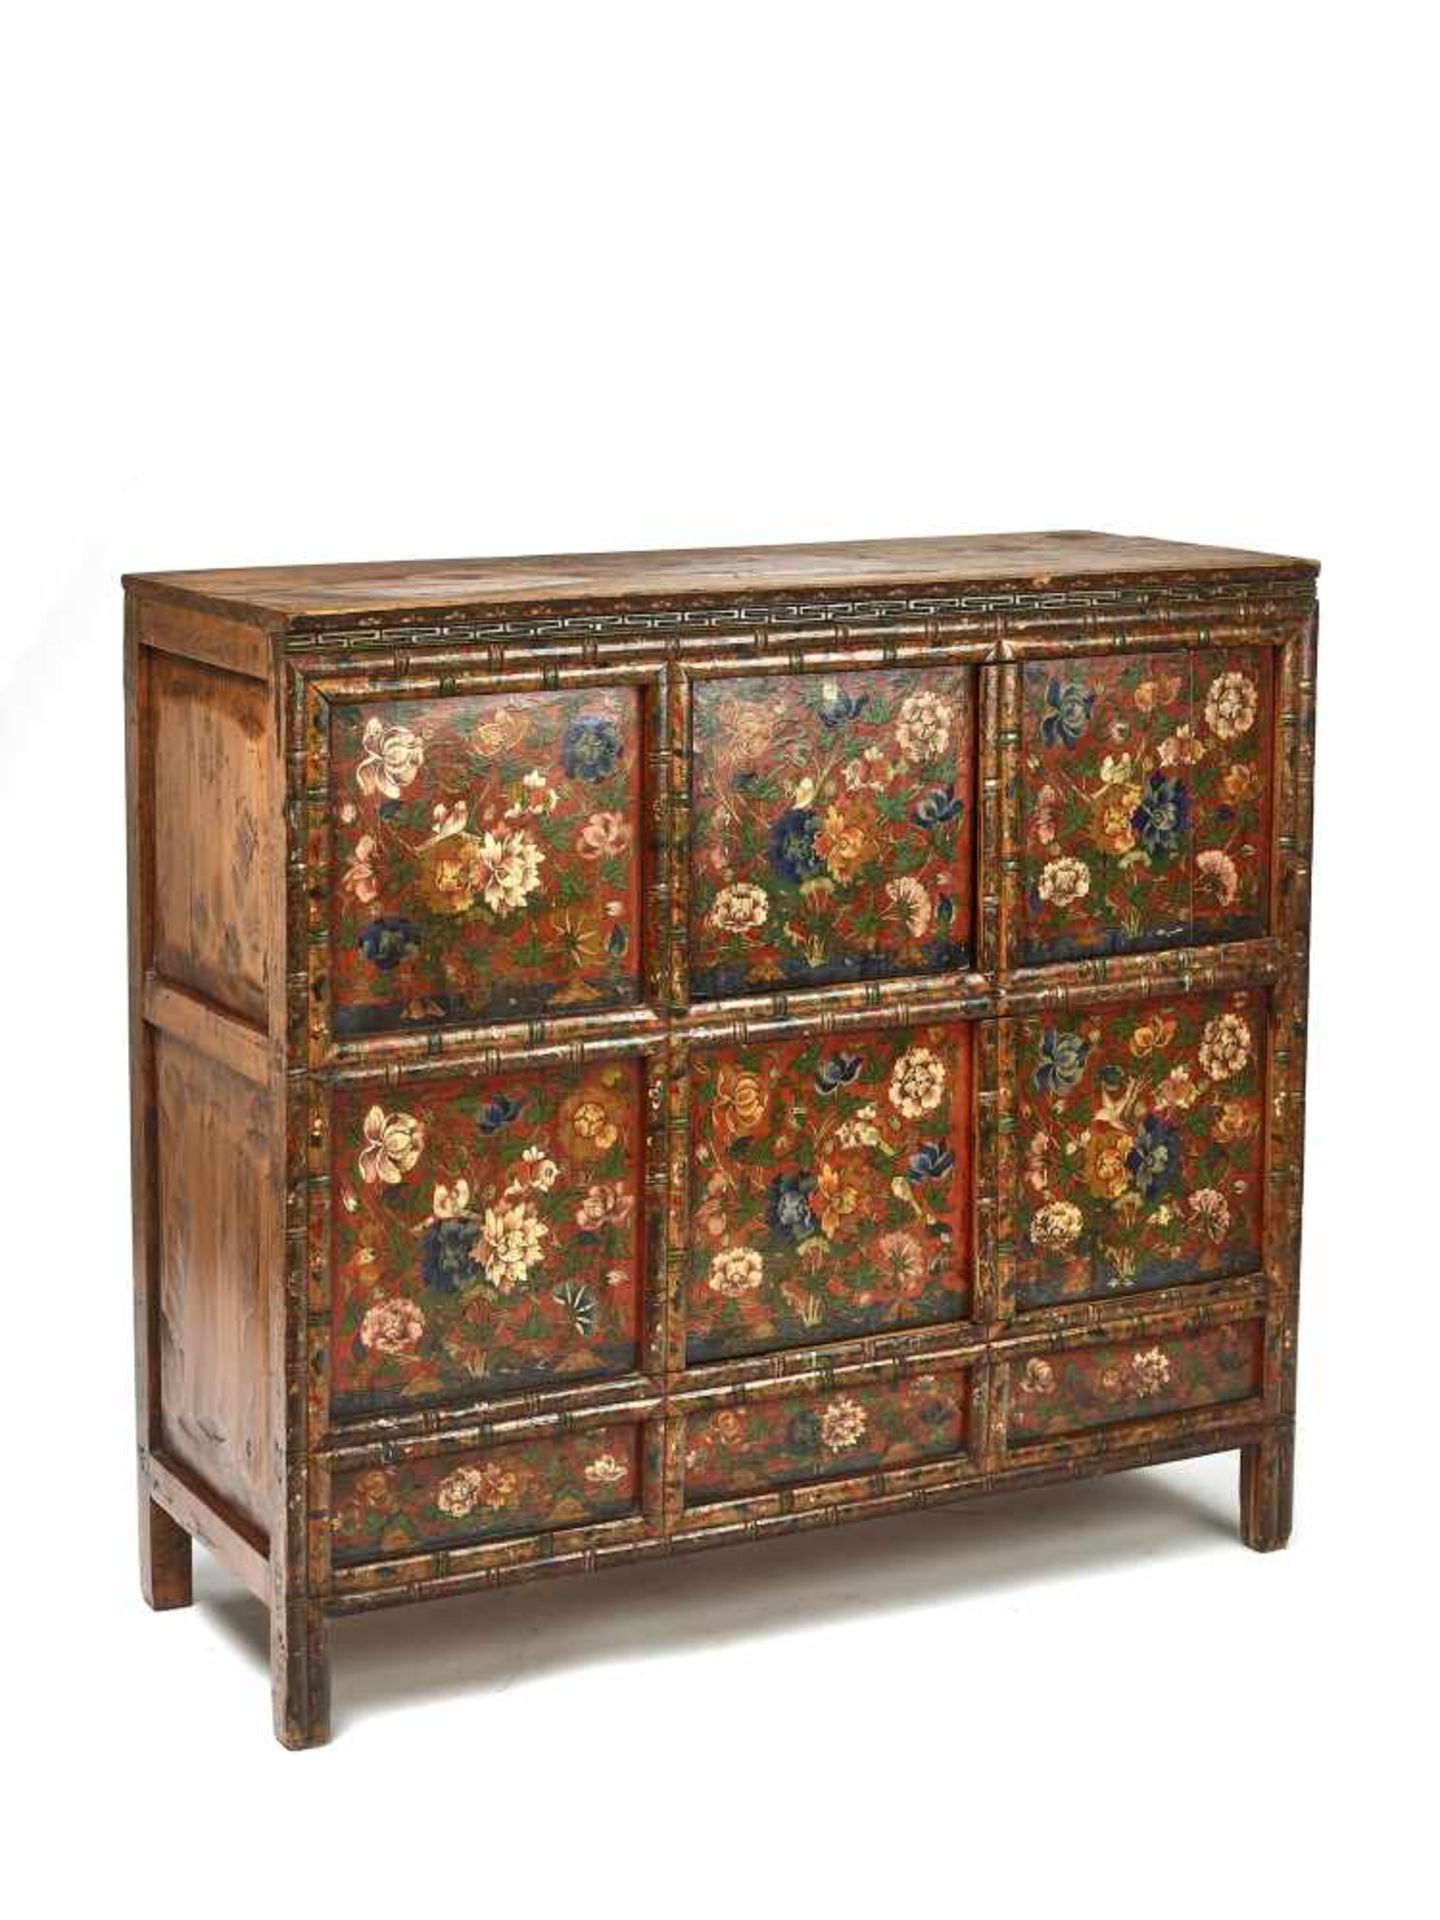 A RARE AND LARGE TIBETAN LACQUERED HARDWOOD CABINET, 19TH CENTURYNicely painted original lacquer - Bild 2 aus 5